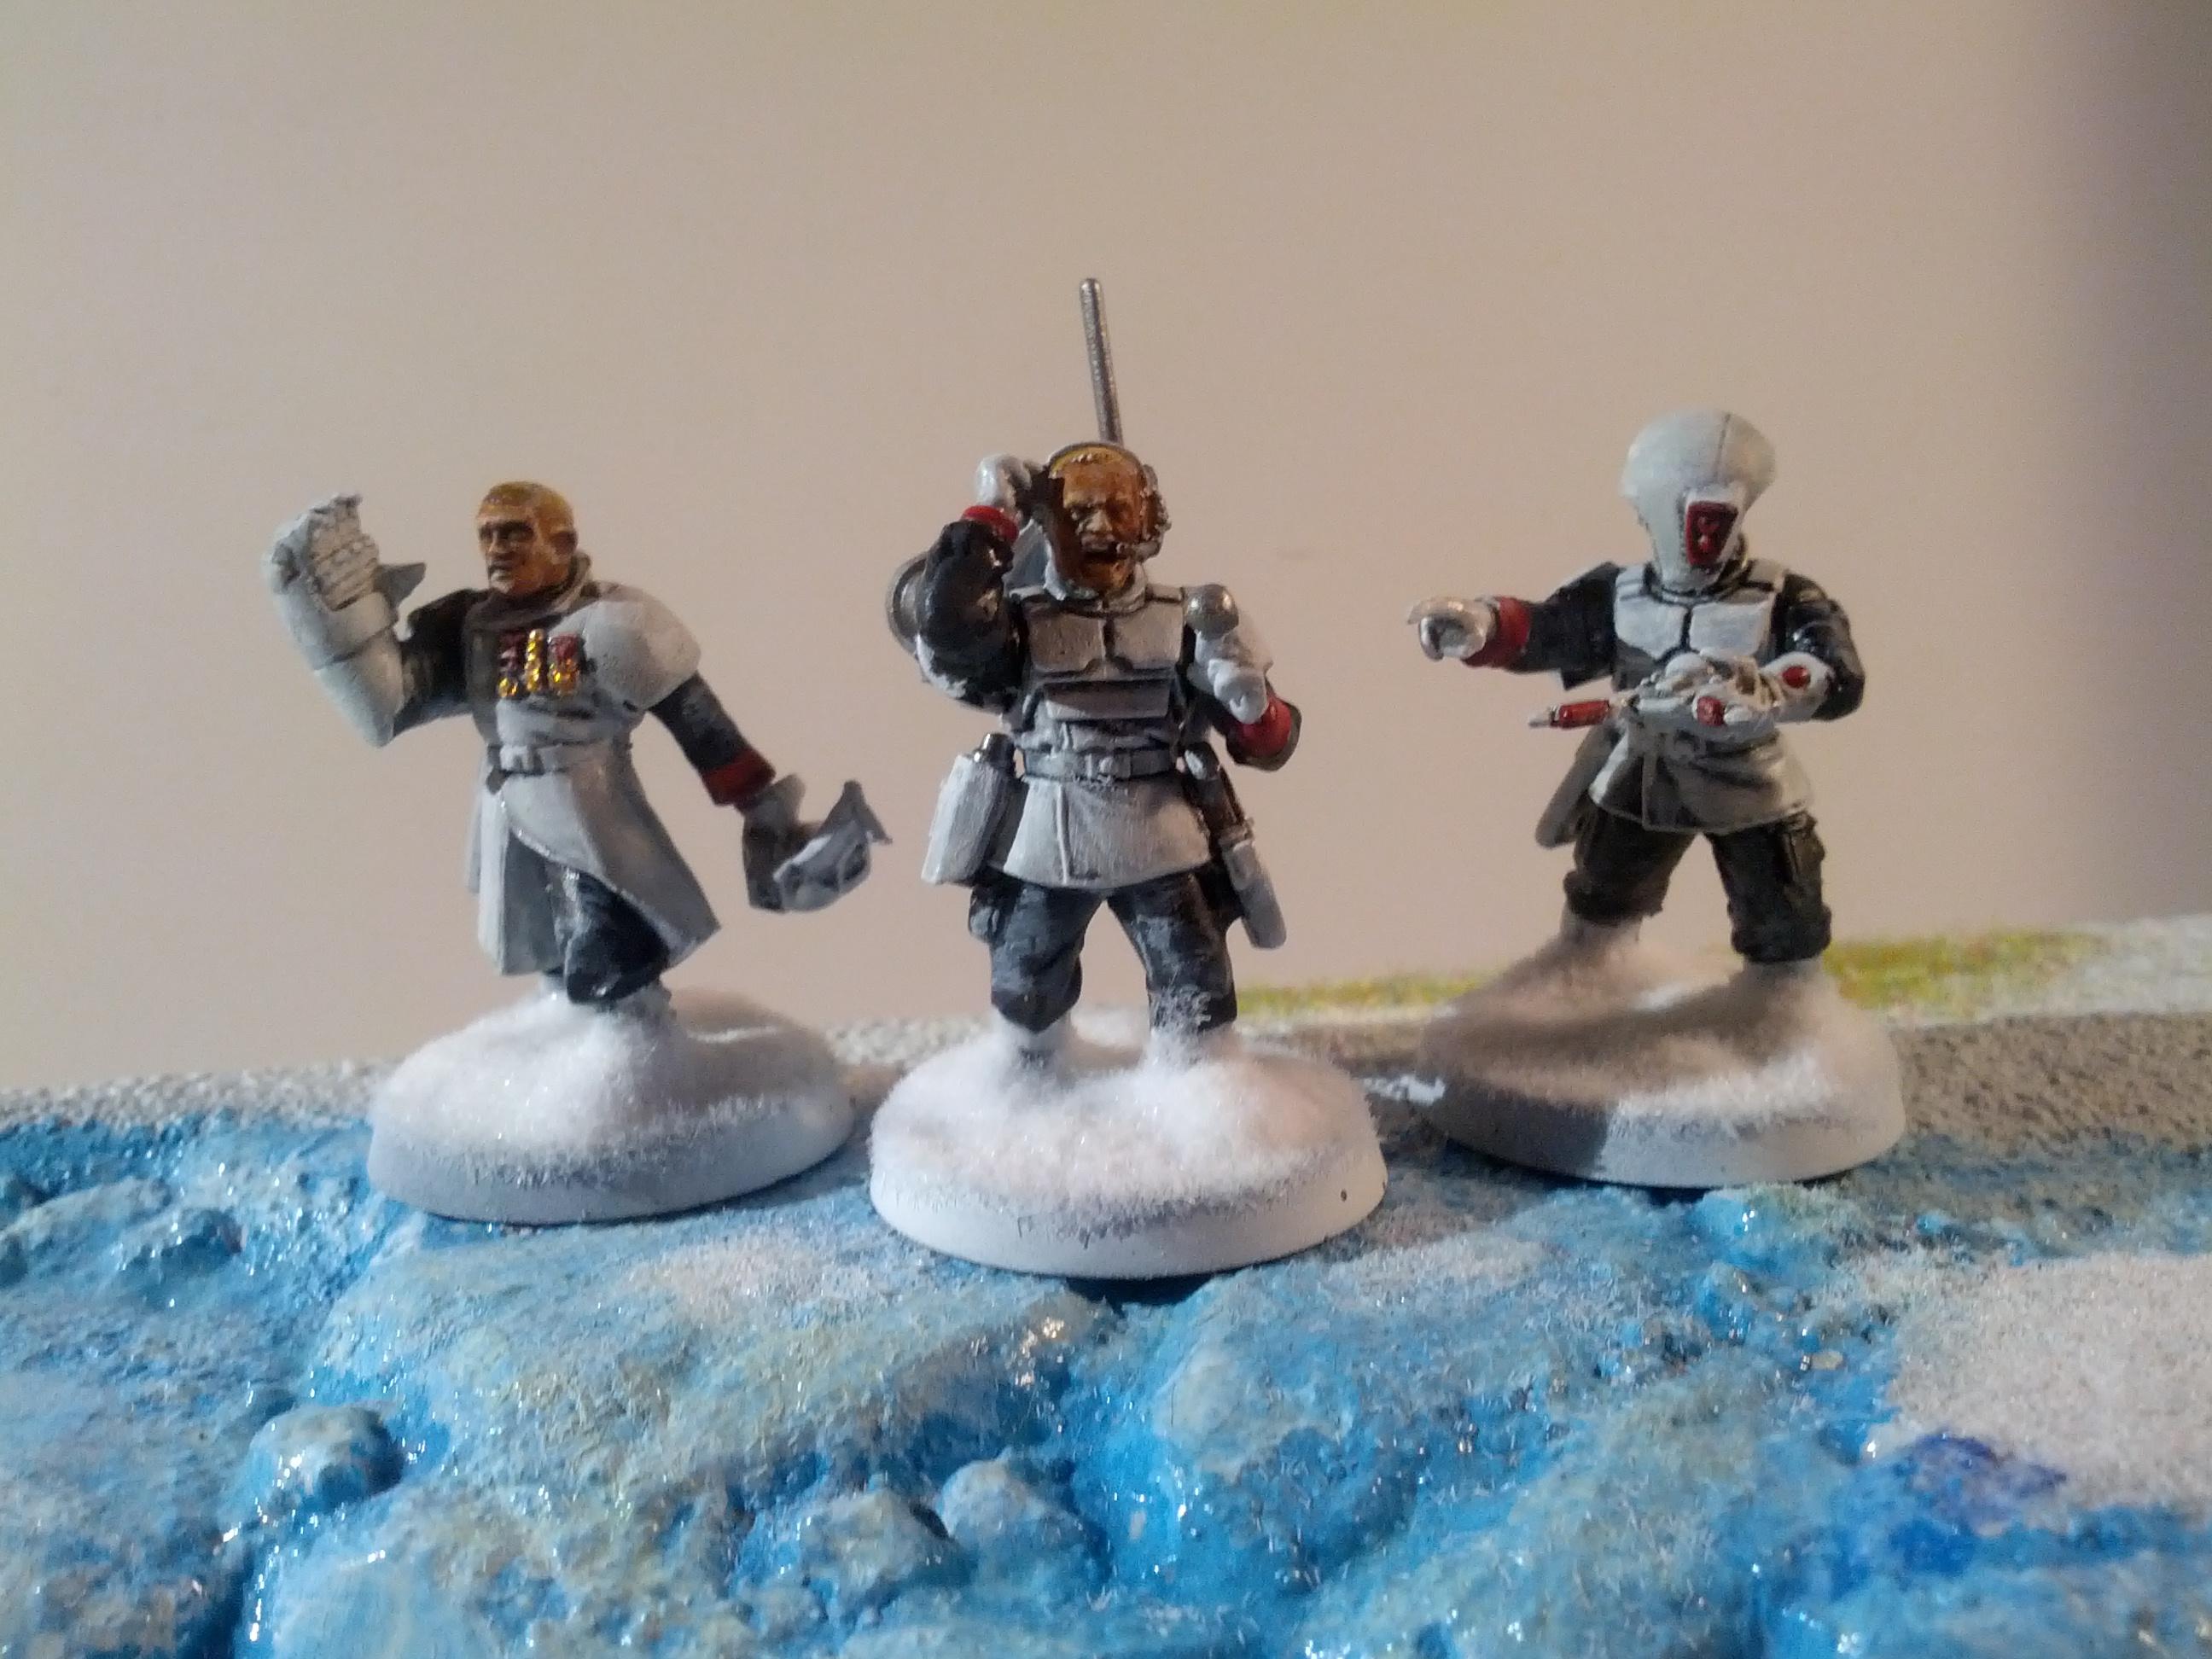 Astropath, Command, Gue'vesa, Imperial Guard, Infantry, Master Of Ordinance, Officer Of The Fleet, Regimental Advisors, Snow, Winter